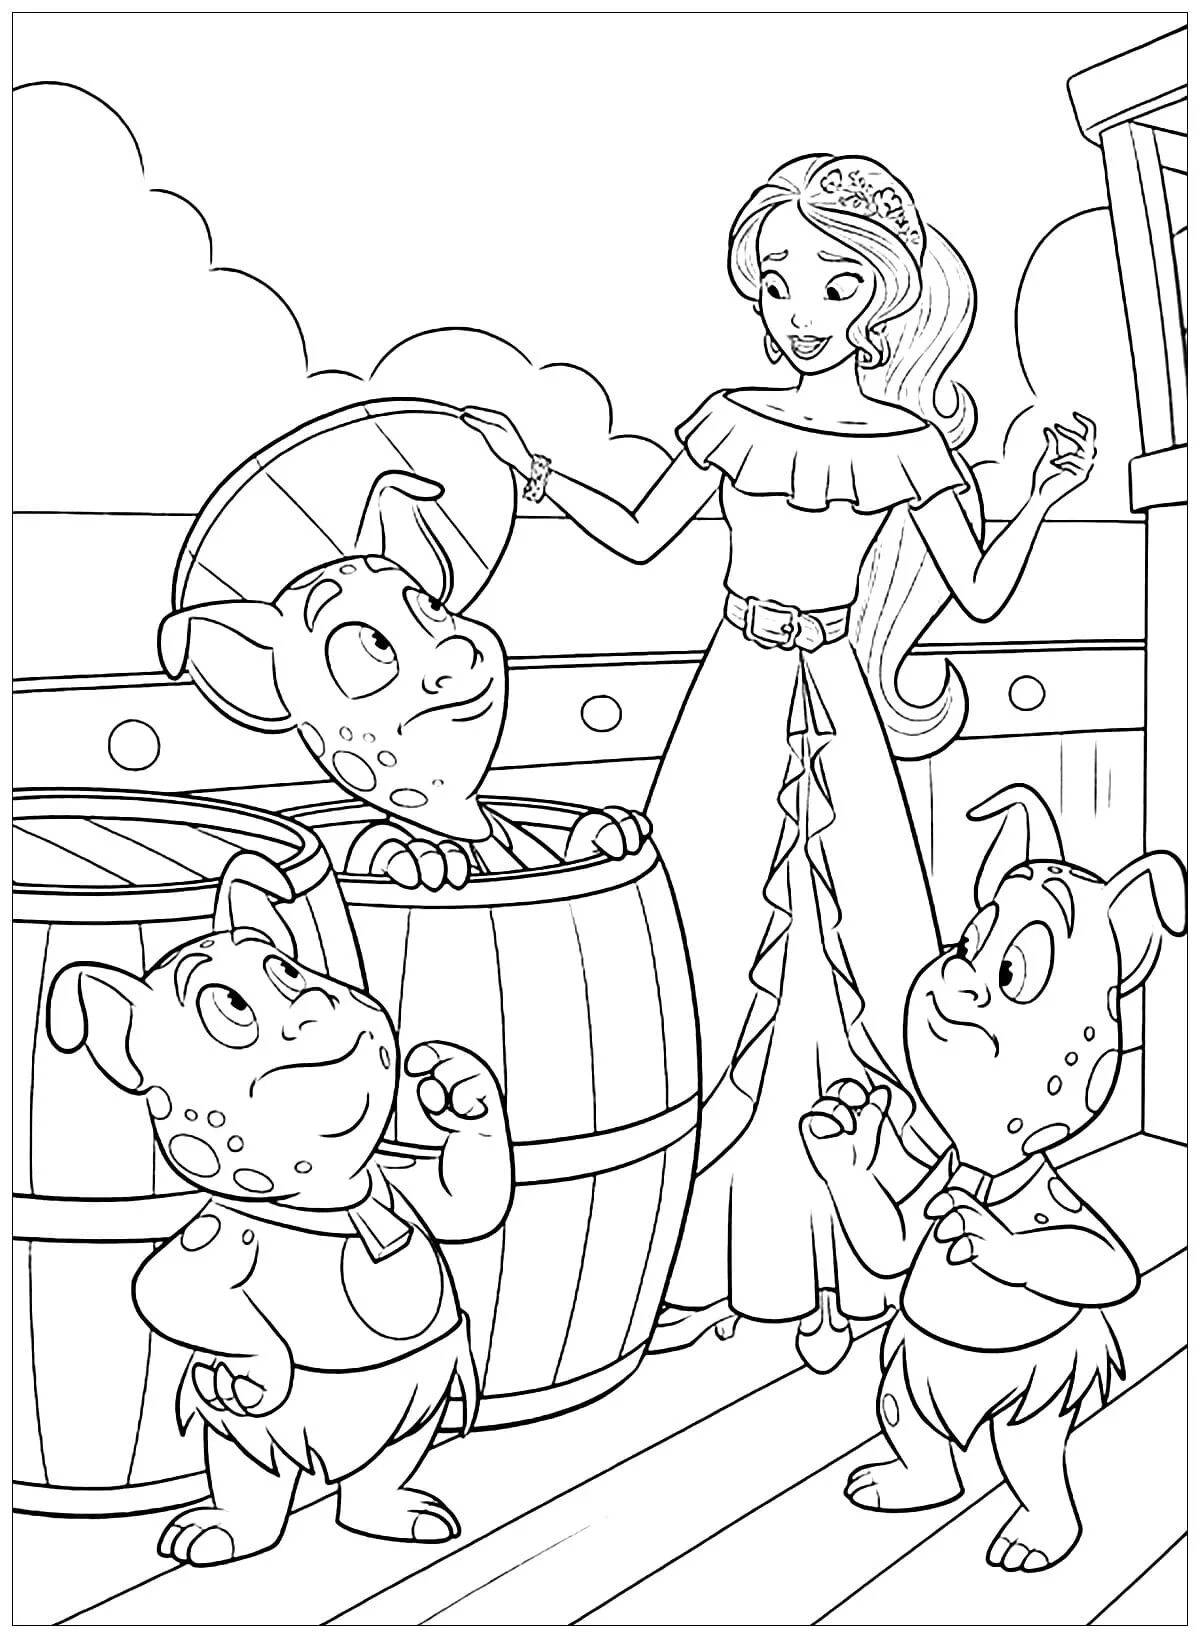 Coloring page dazzling elena of avalor